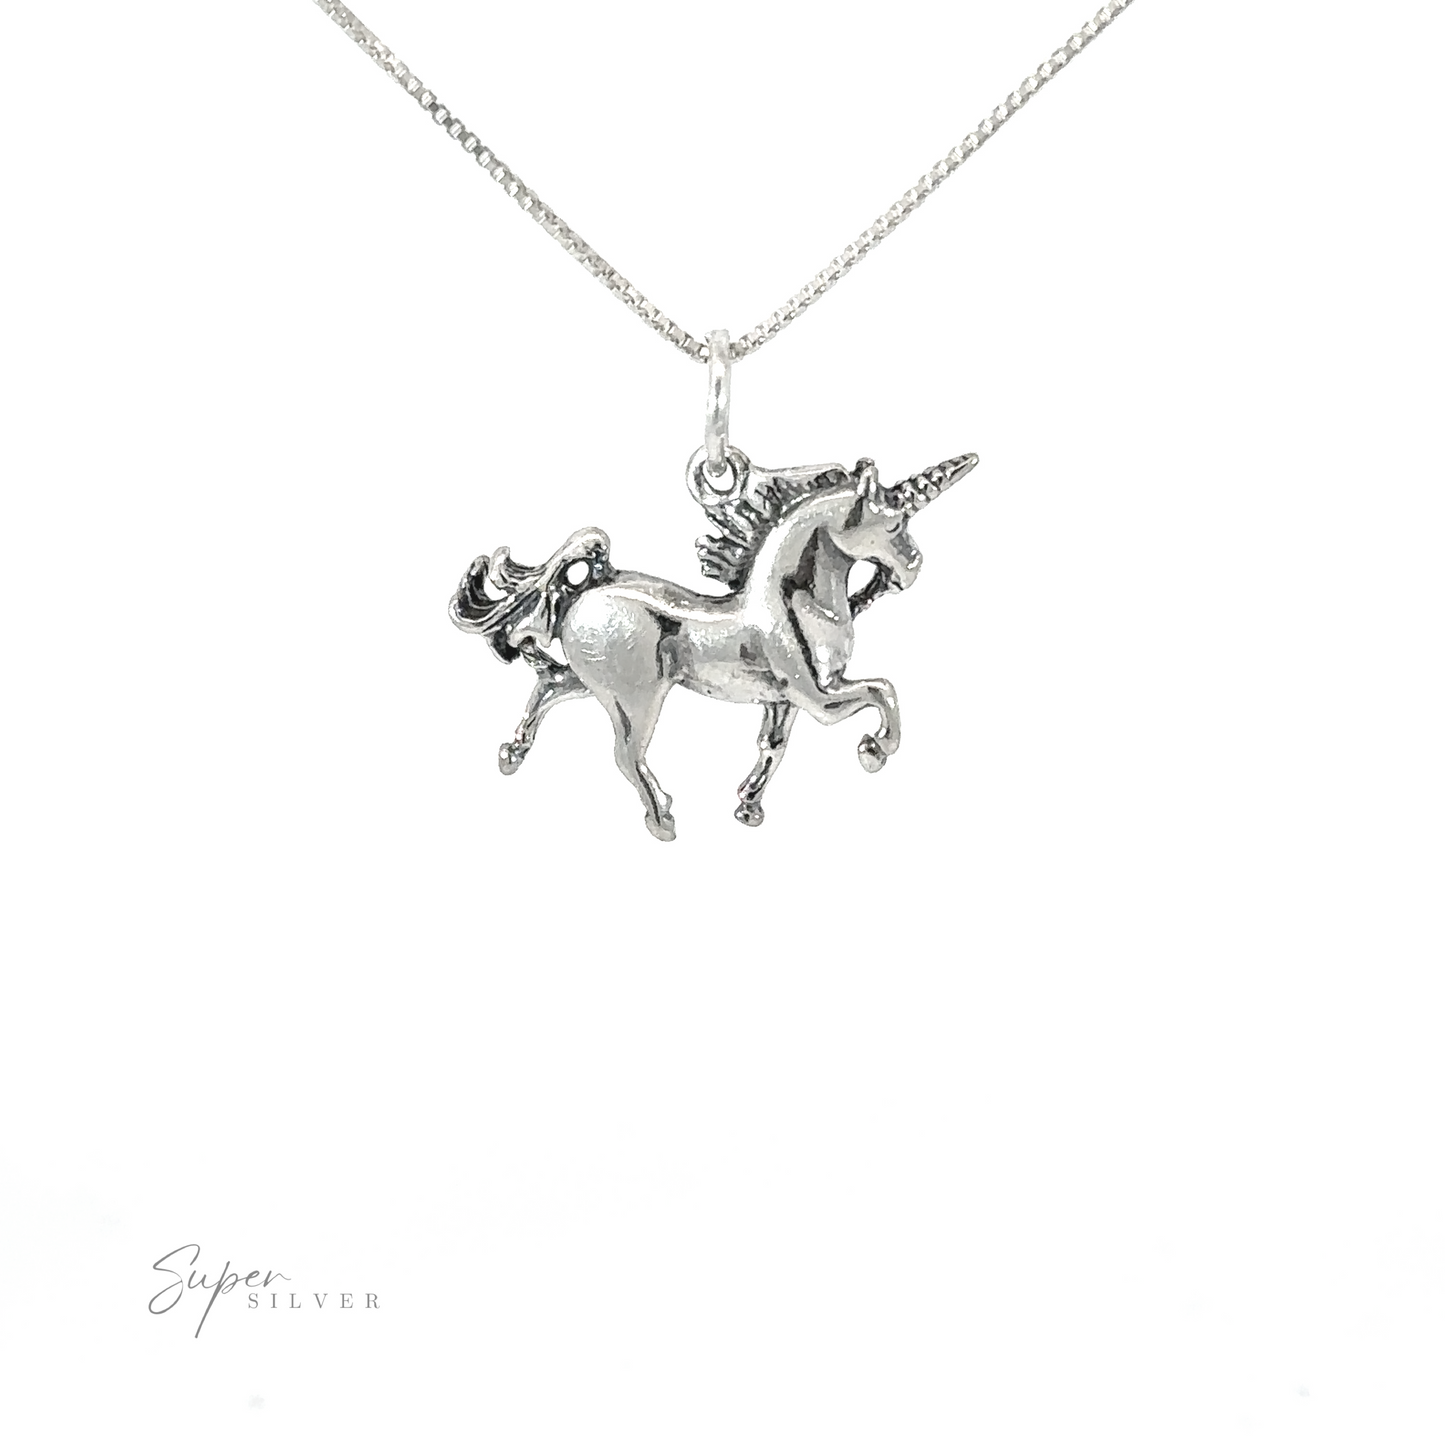 A .925 sterling silver Reversible Unicorn Charm pendant on a chain, set on a white background.